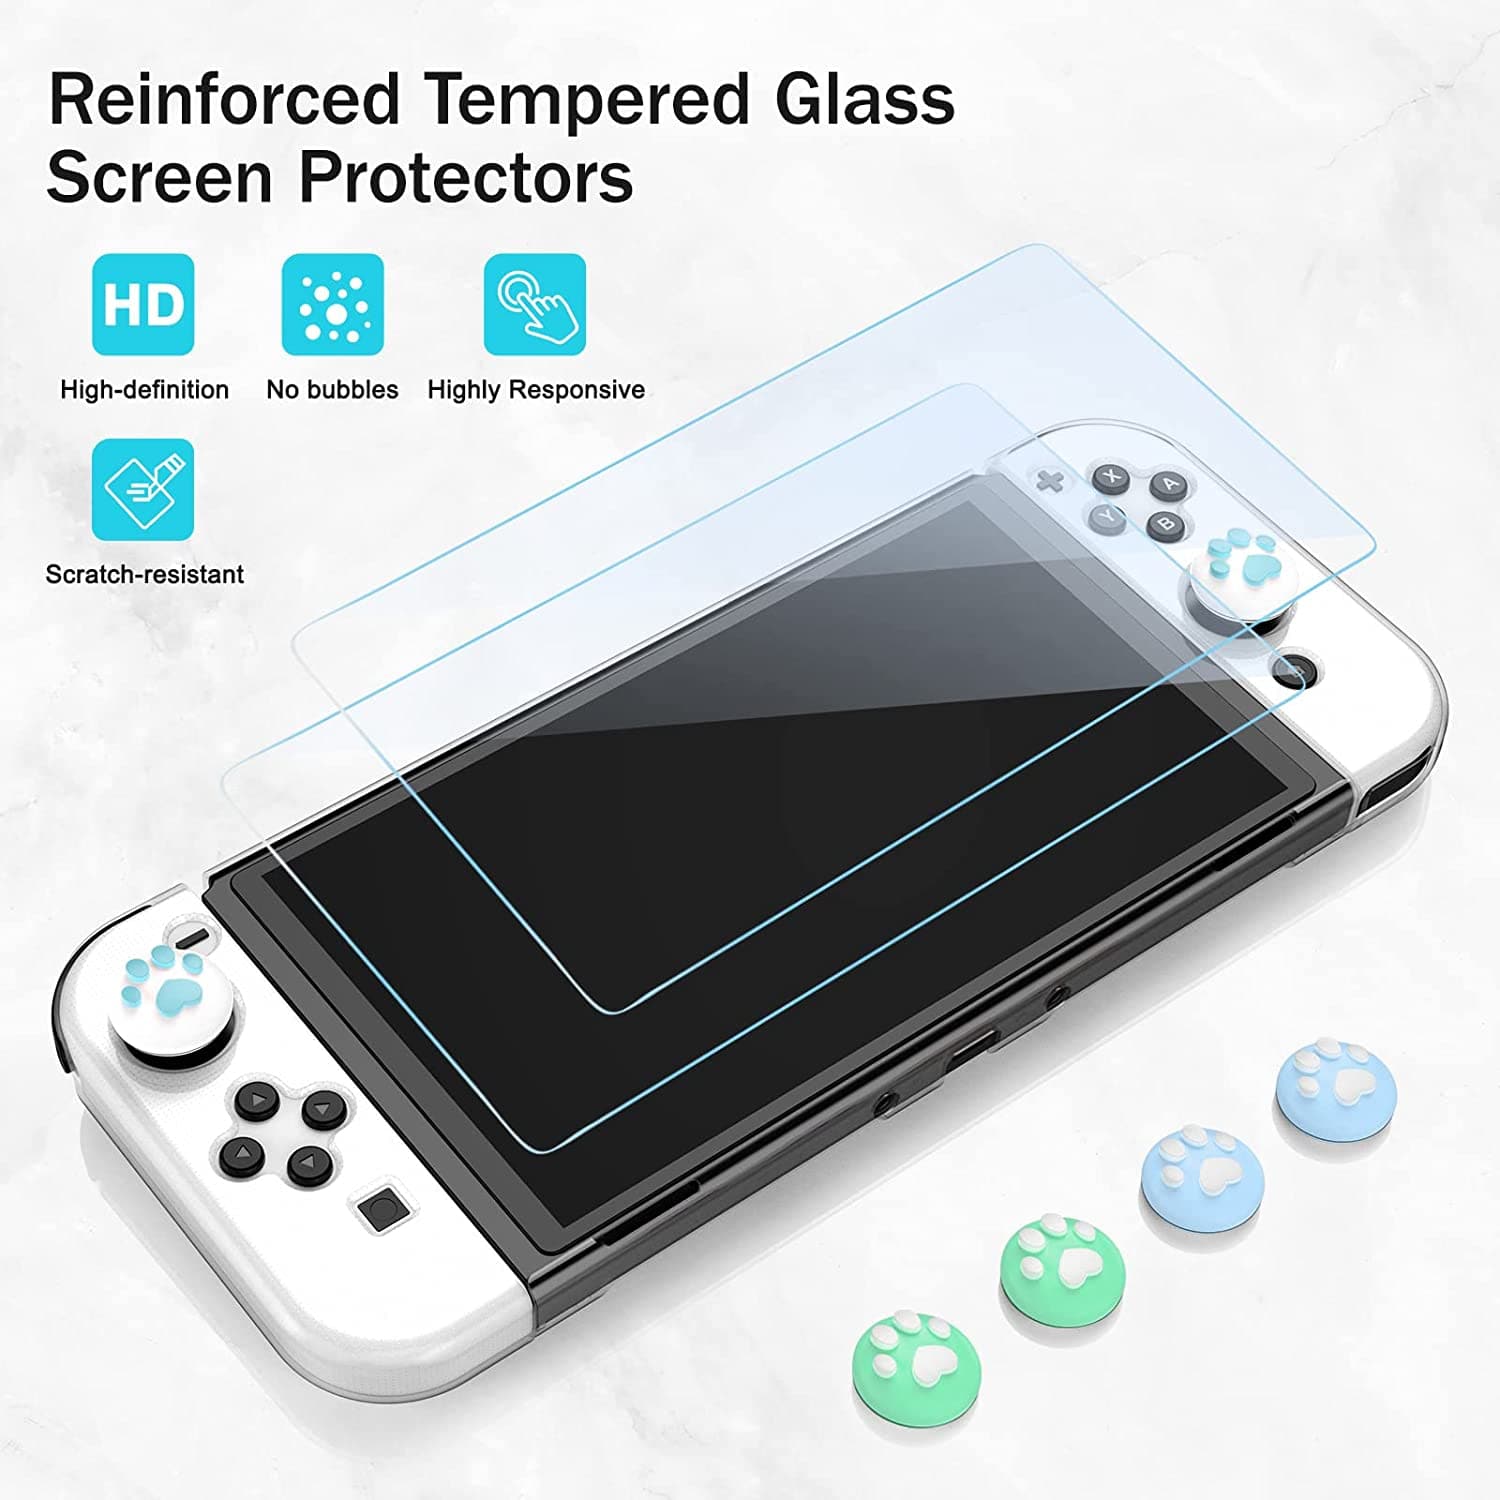 Younik Nintendo Switch OLED Travel Case, OLED Switch Cover Trending Gift